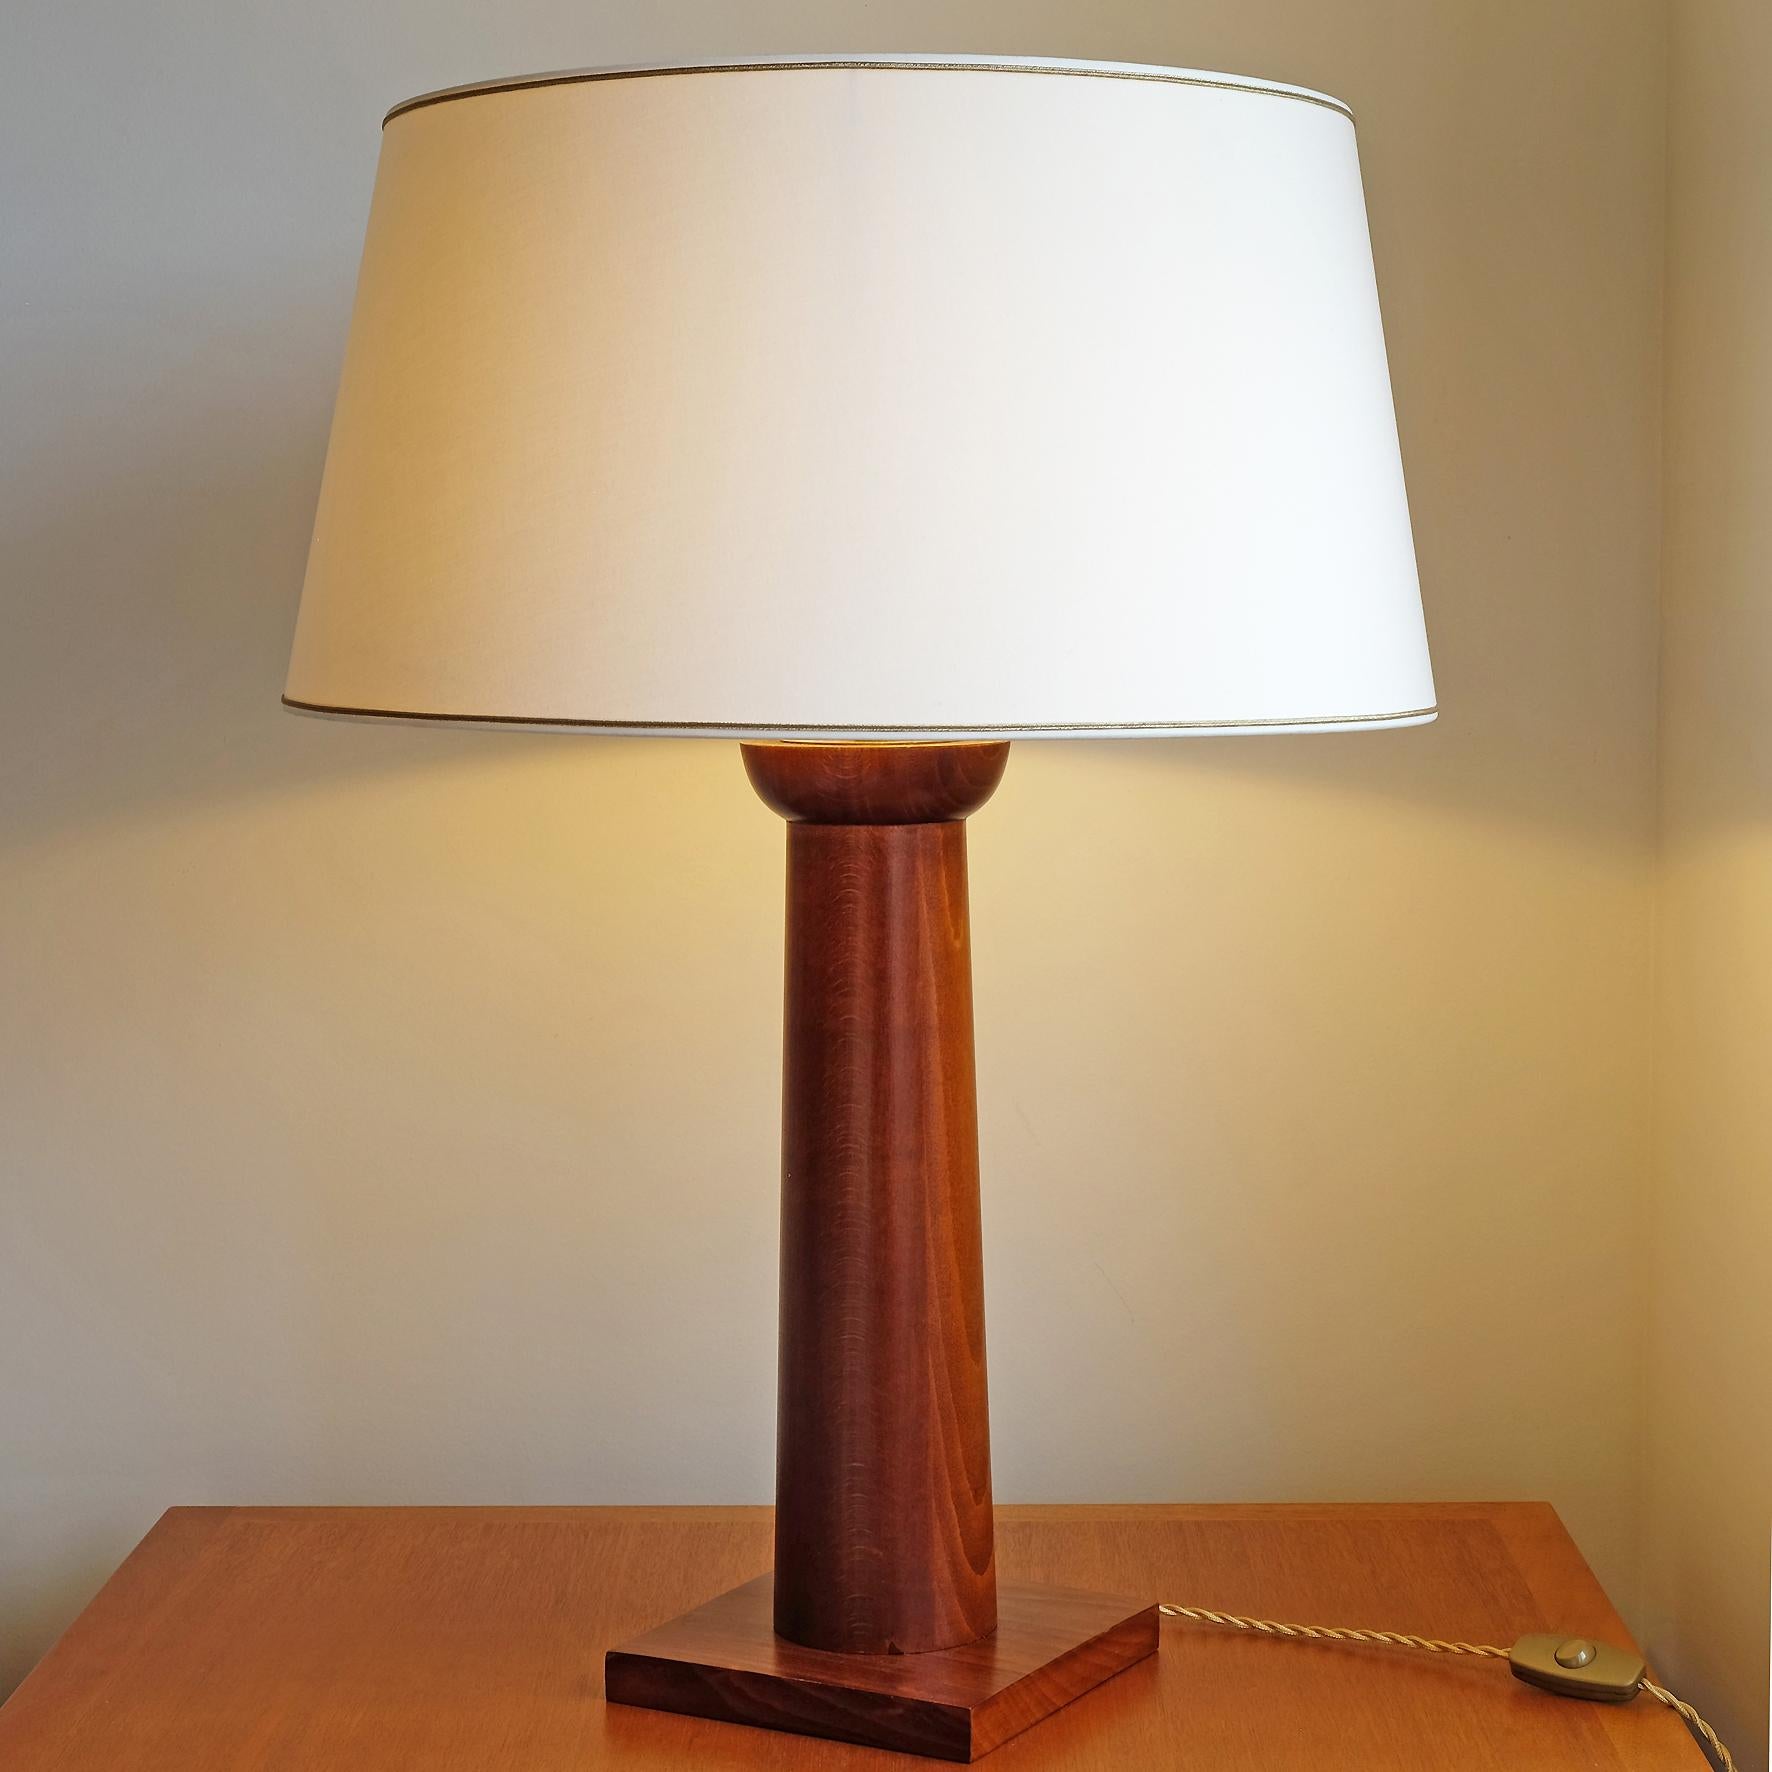 A beech table lamp shaped as a stylized Doric column.

This superb model is inspired by the iconic models of Jean-Michel Frank.

Overall height with shade: 75 cm (29 in.1/2)
Diameter of the shade: 55 cm (21 in.3/4).

